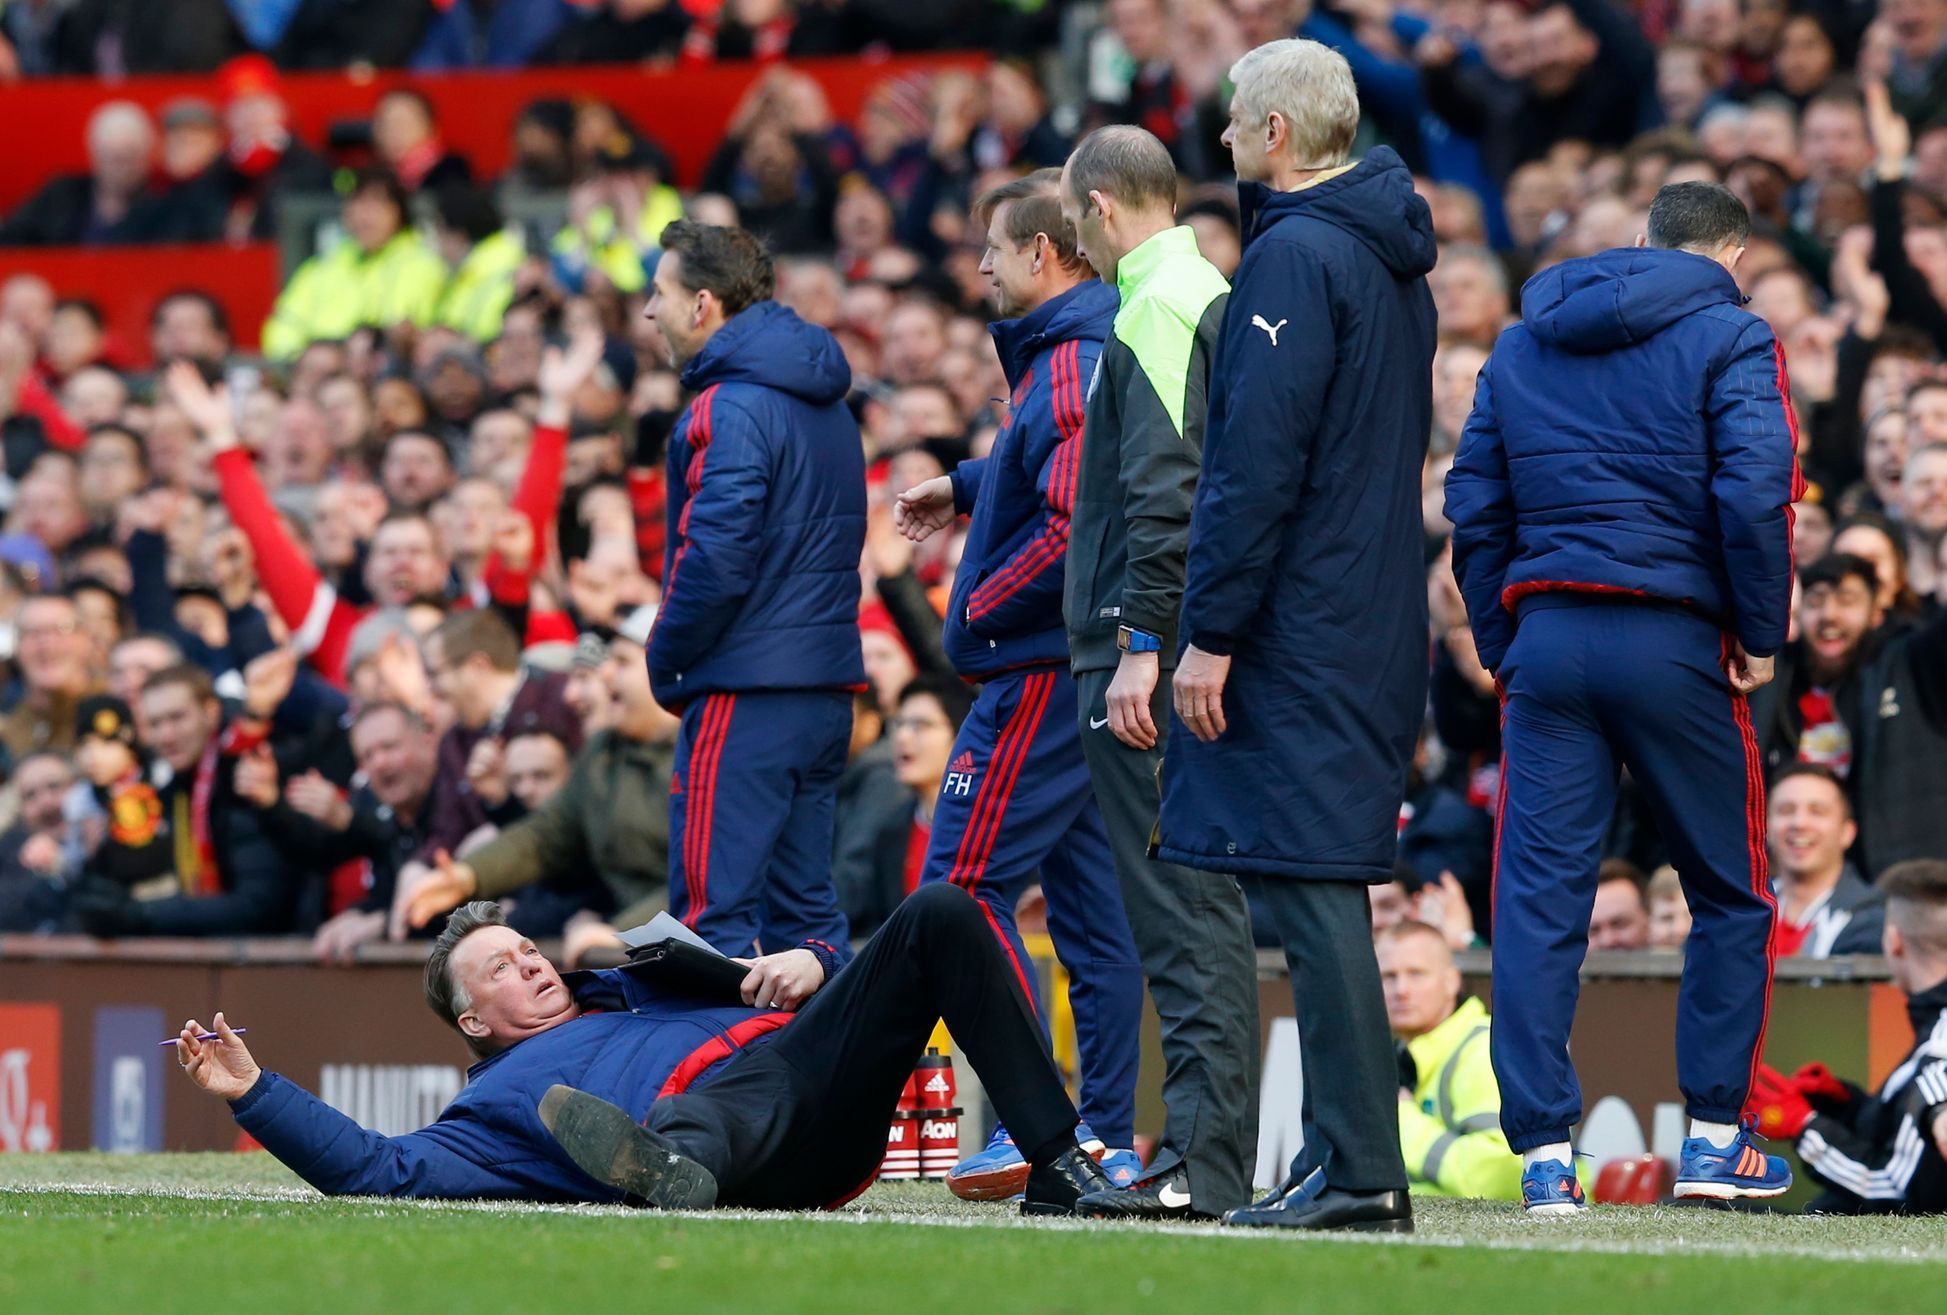 Manchester United manager Louis van Gaal lies on the side of the pitch to demonstrate a foul to the fourth official Mike Dean